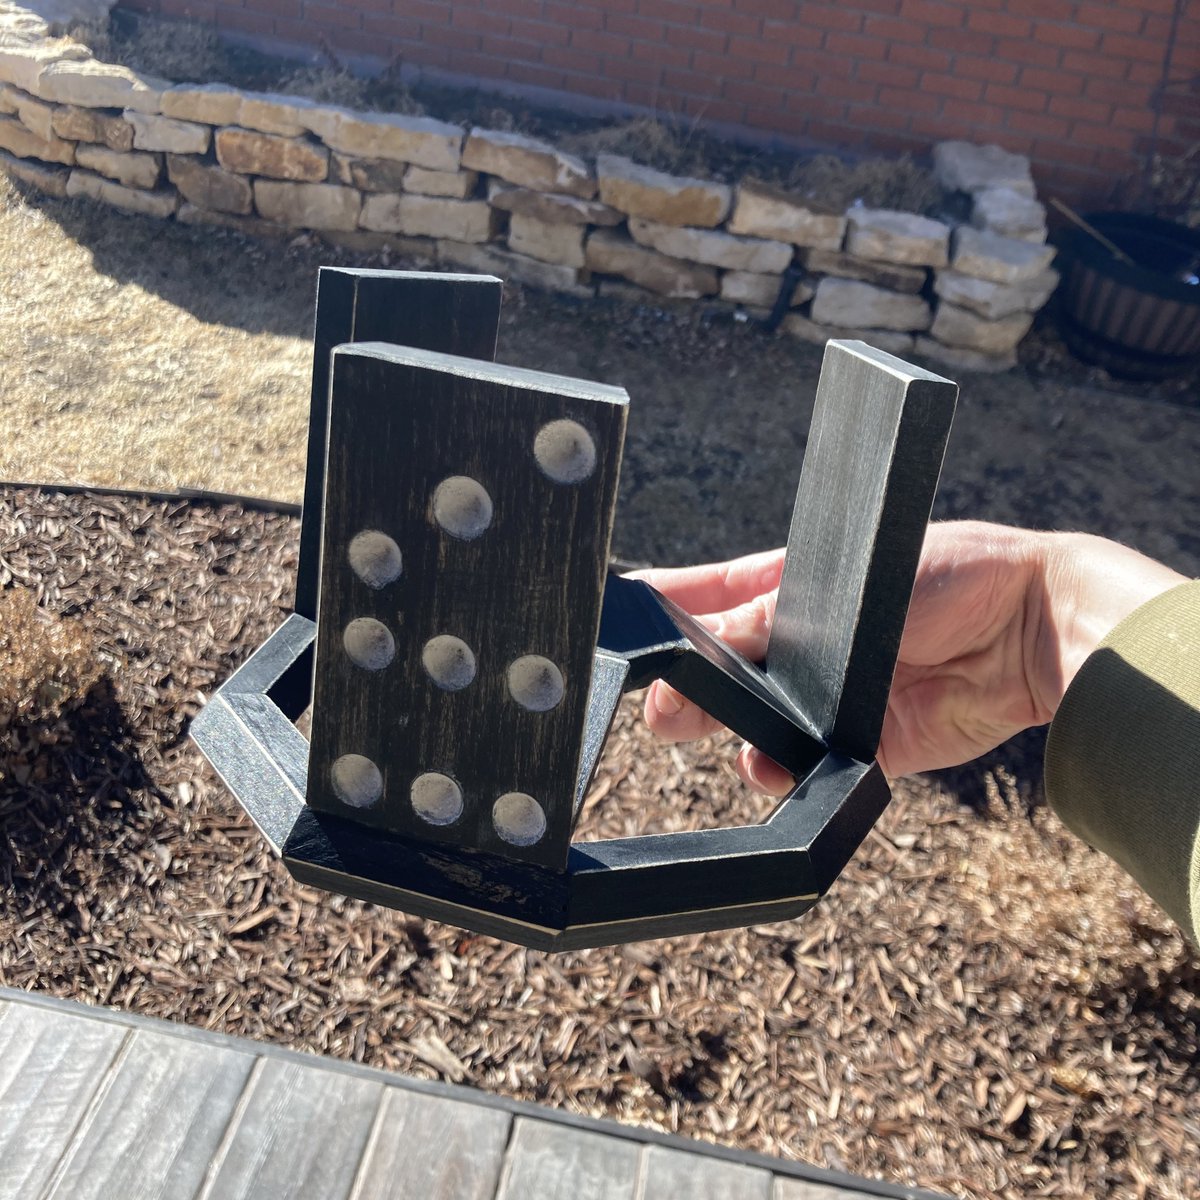 1joeb On Twitter Took Some Time Away From The Computer To Make A Real Life Black Iron Domino Crown Turned Out Very Well Roblox - roblox domino crown in real life